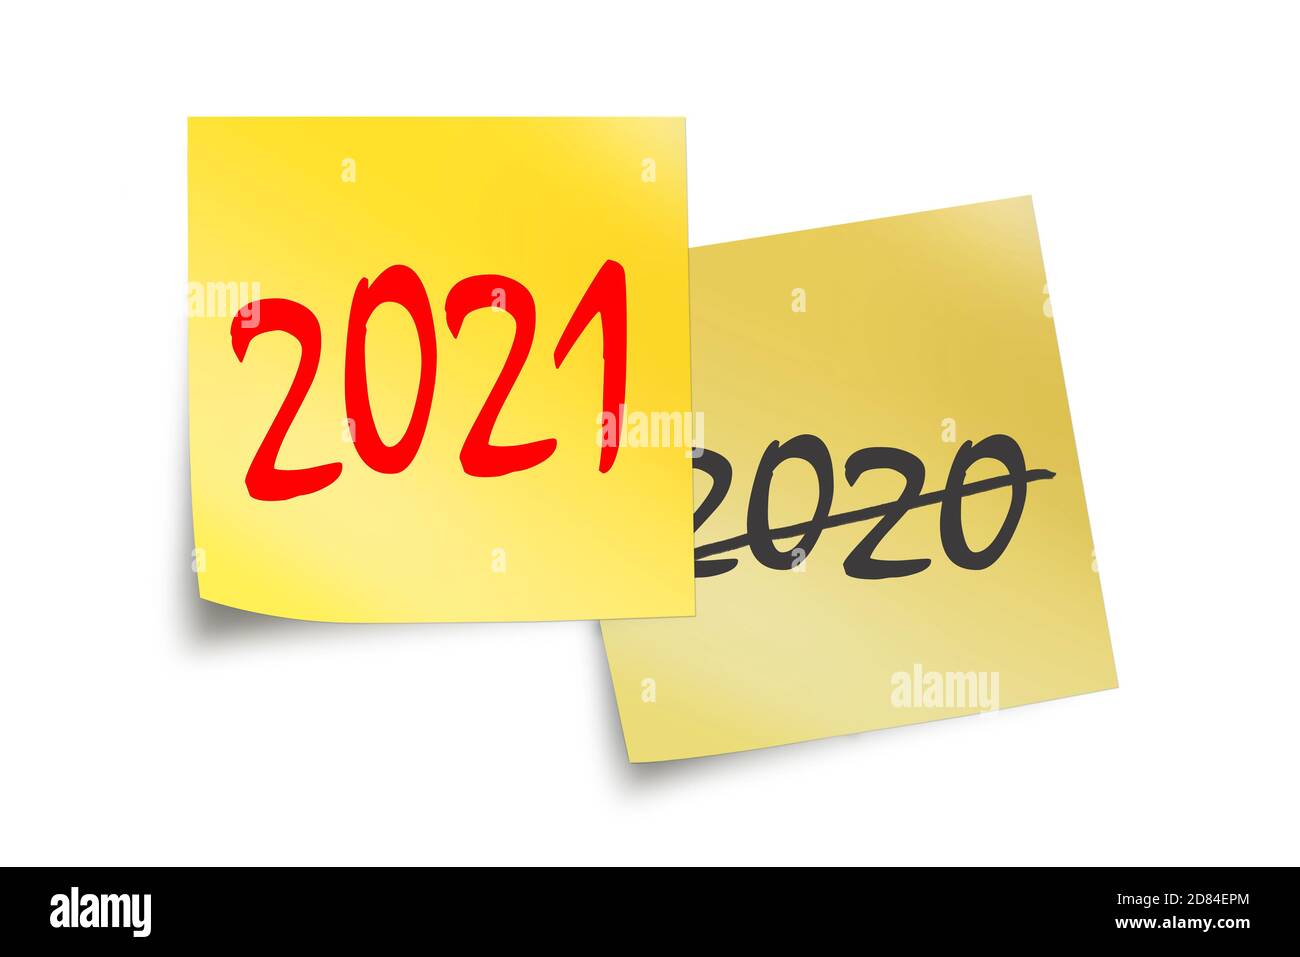 2021 and 2020 written on yellow sticky notes isolated on white Stock Photo